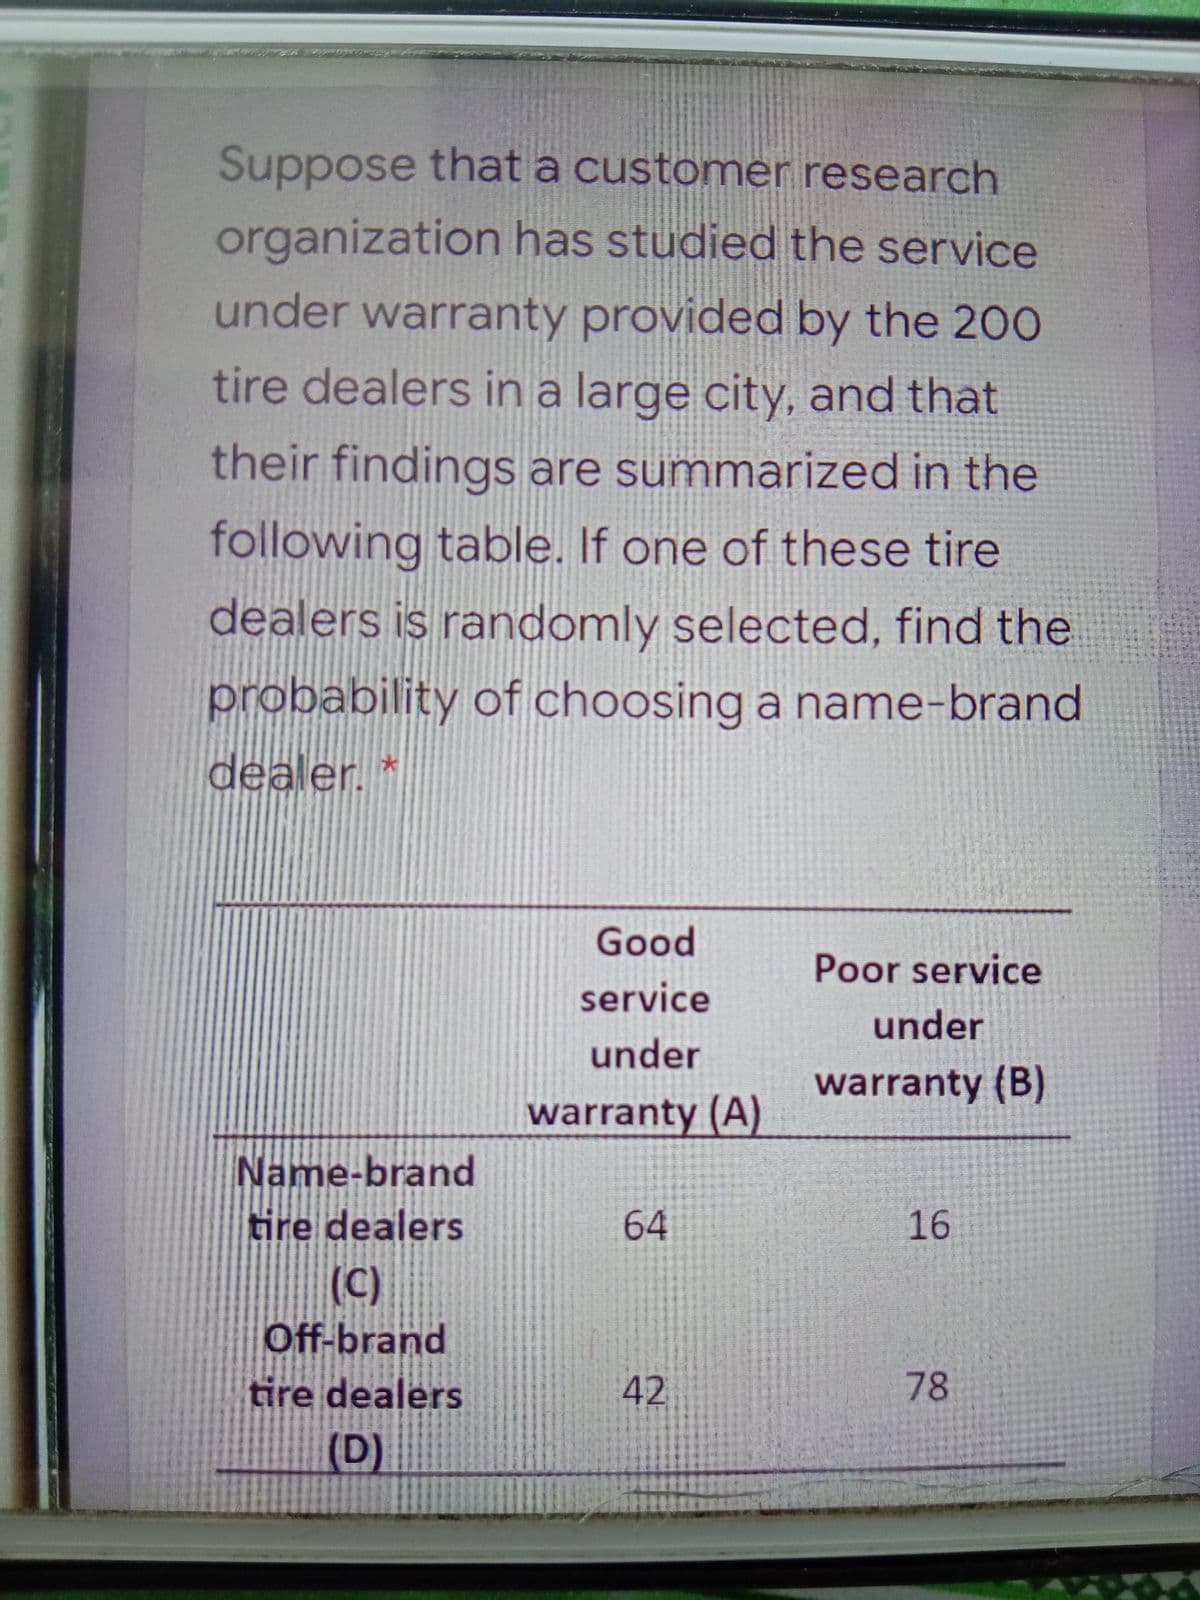 Suppose that a customer research
organization has studied the service
under warranty provided by the 200
tire dealers in a large city, and that
their findings are summarized in the
following table. If one of these tire
dealers is randomly selected, find the
probability of choosing a name-brand
dealer.
Good
Poor service
service
under
under
warranty (B)
warranty (A)
Name-brand
tire dealers
(C)
Off-brand
tire dealers
(D)
64
16
42
78
